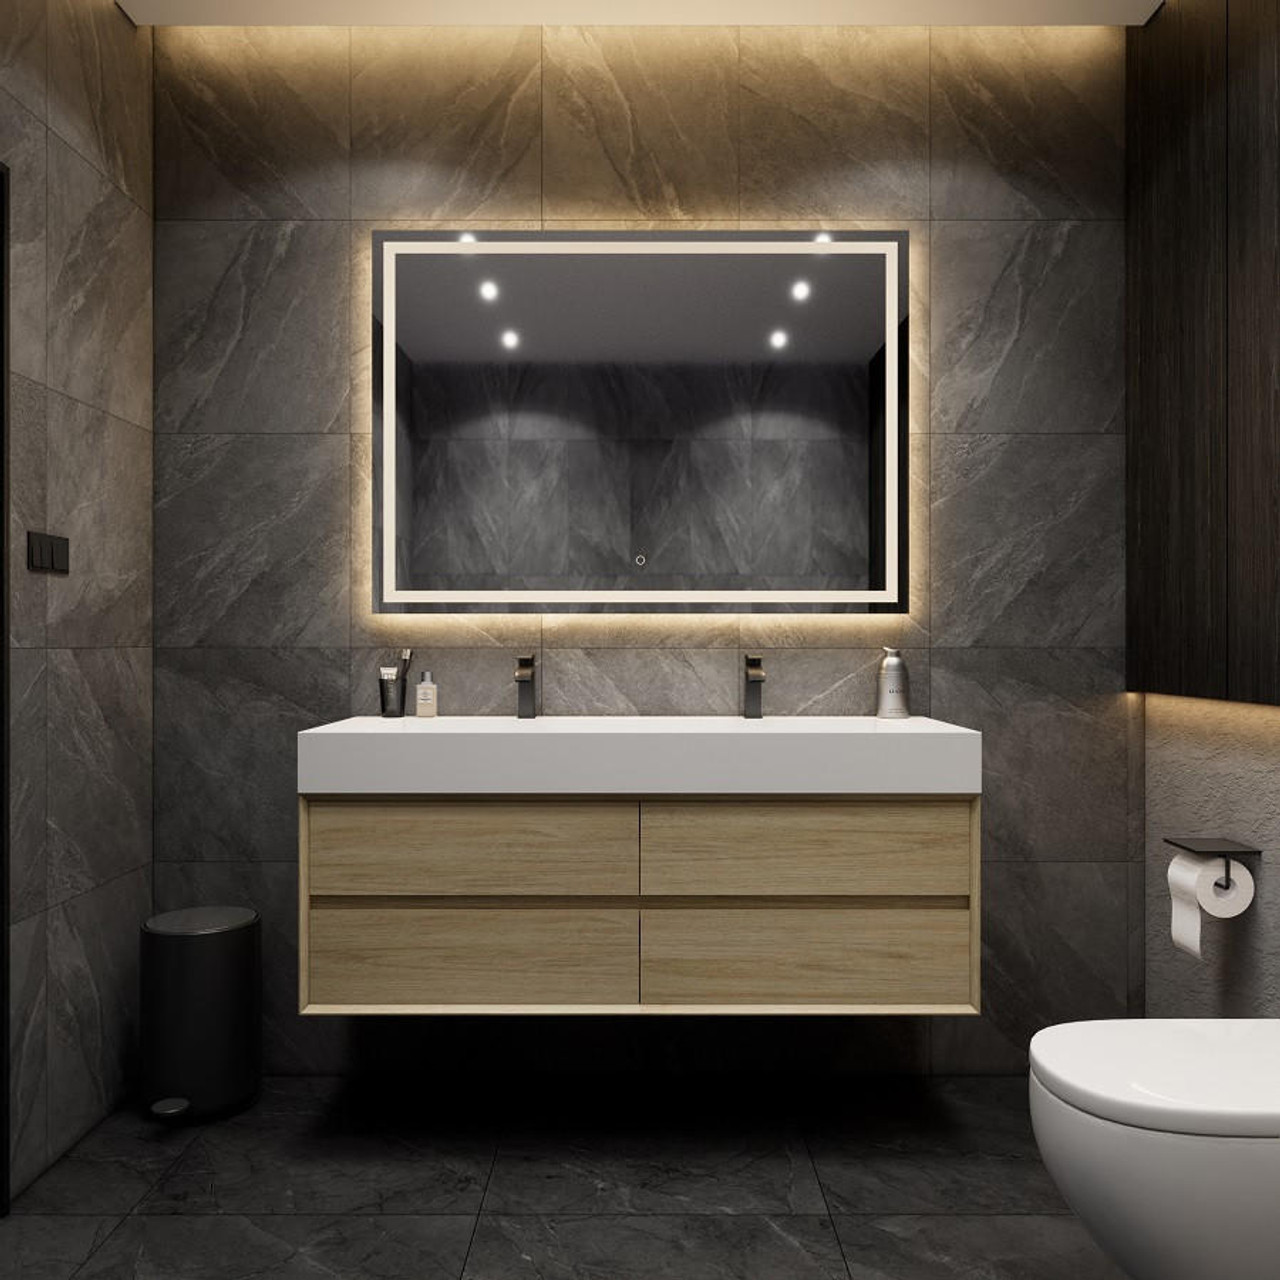 https://cdn11.bigcommerce.com/s-qgdlnuy6t7/images/stencil/1280x1280/products/1371/14480/max16-max-60-wall-mounted-bath-vanity-with-16-acrylic-sinkdouble-faucet-holes__15339.1699298323.jpg?c=2